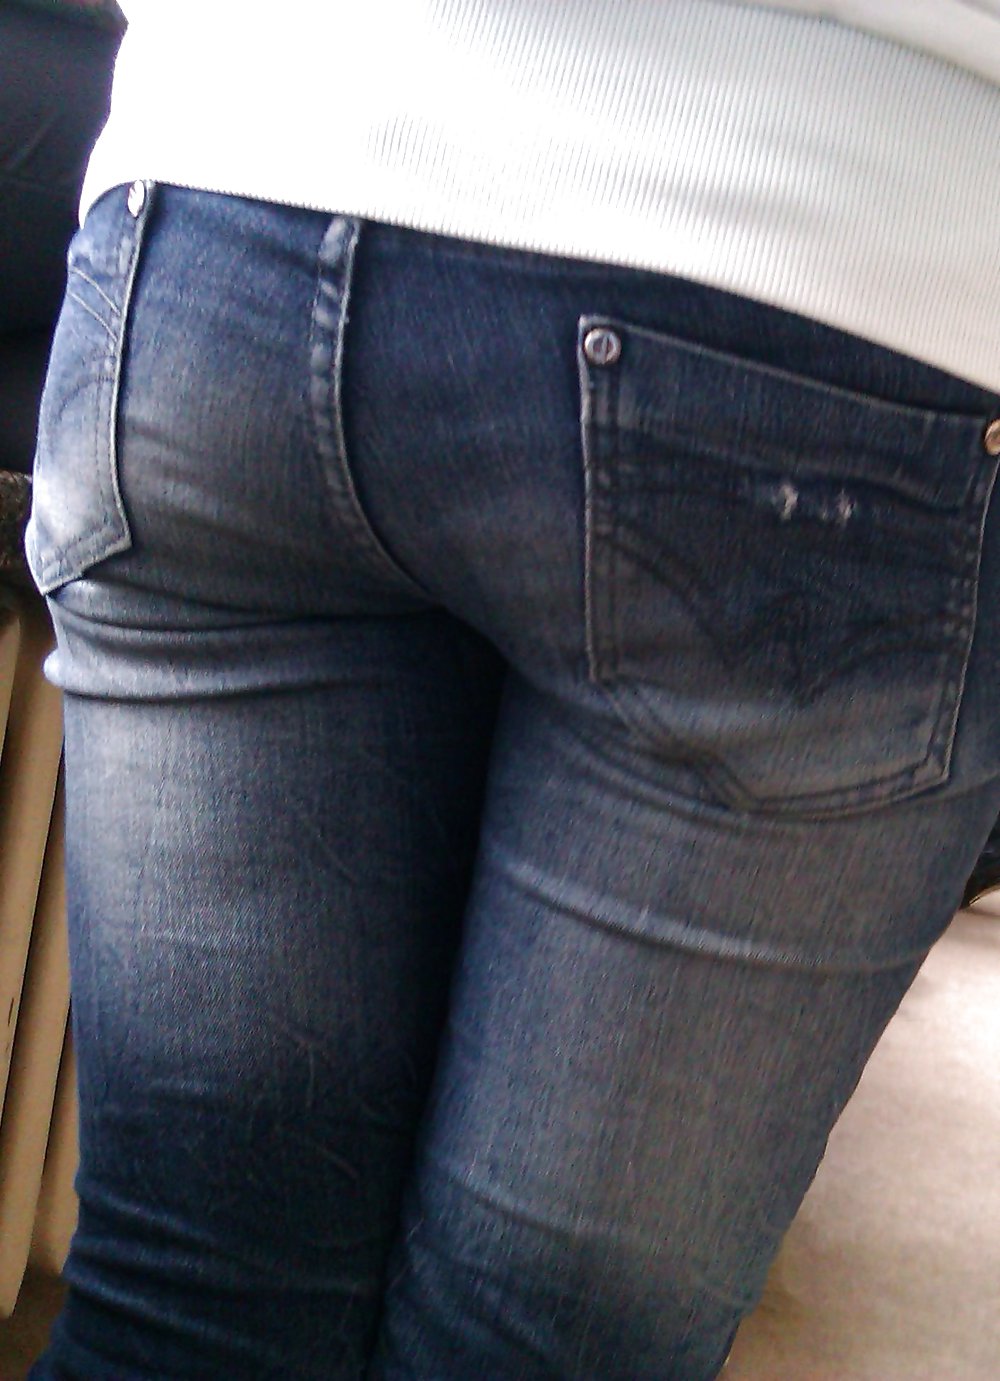 Candid teen ass in jeans #23904636